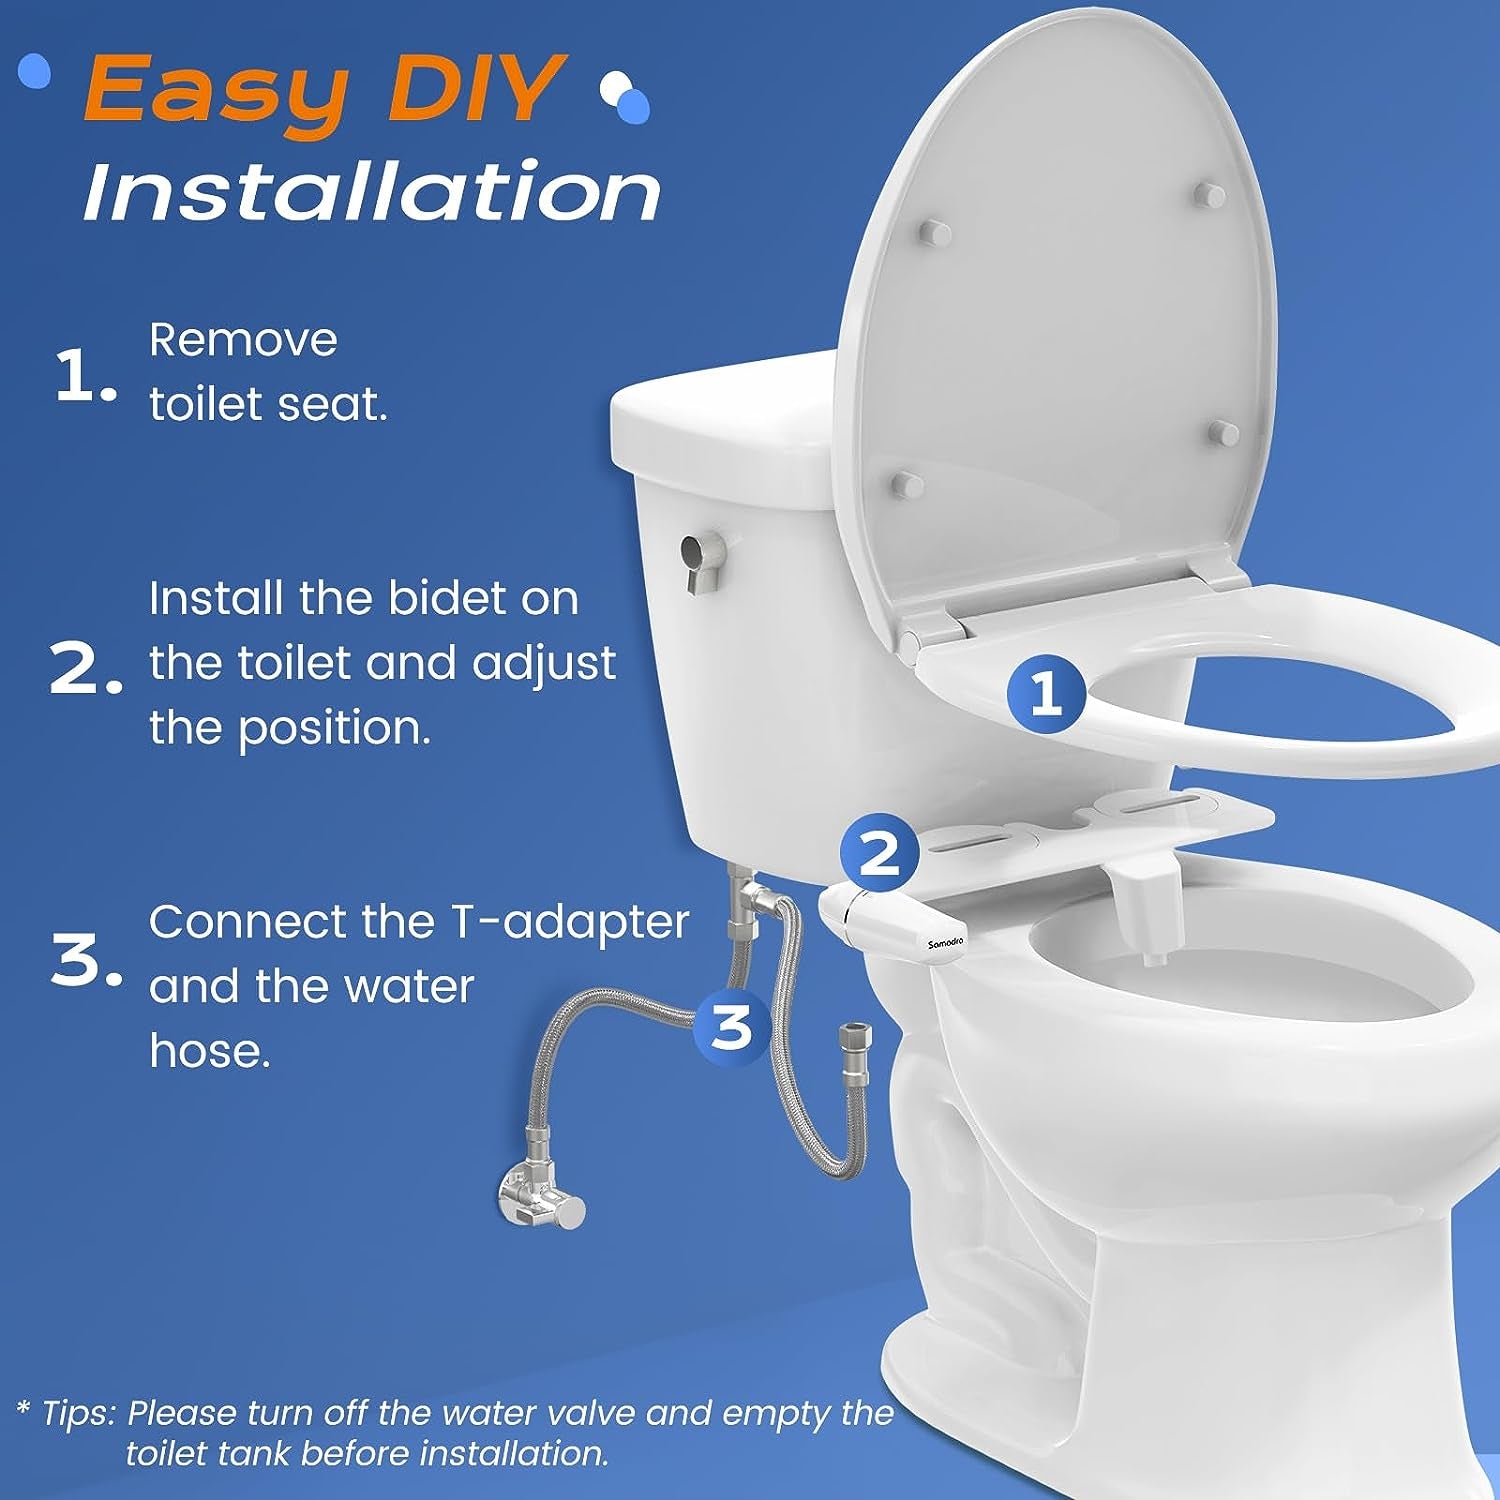 Ultra-Slim Bidet Attachment for Toilet - Self Cleaning Nozzle Hygienic Bidets for Existing Toilets - Adjustable Water Pressure Fresh Water Sprayer Toilet Bidet - Easy to Install